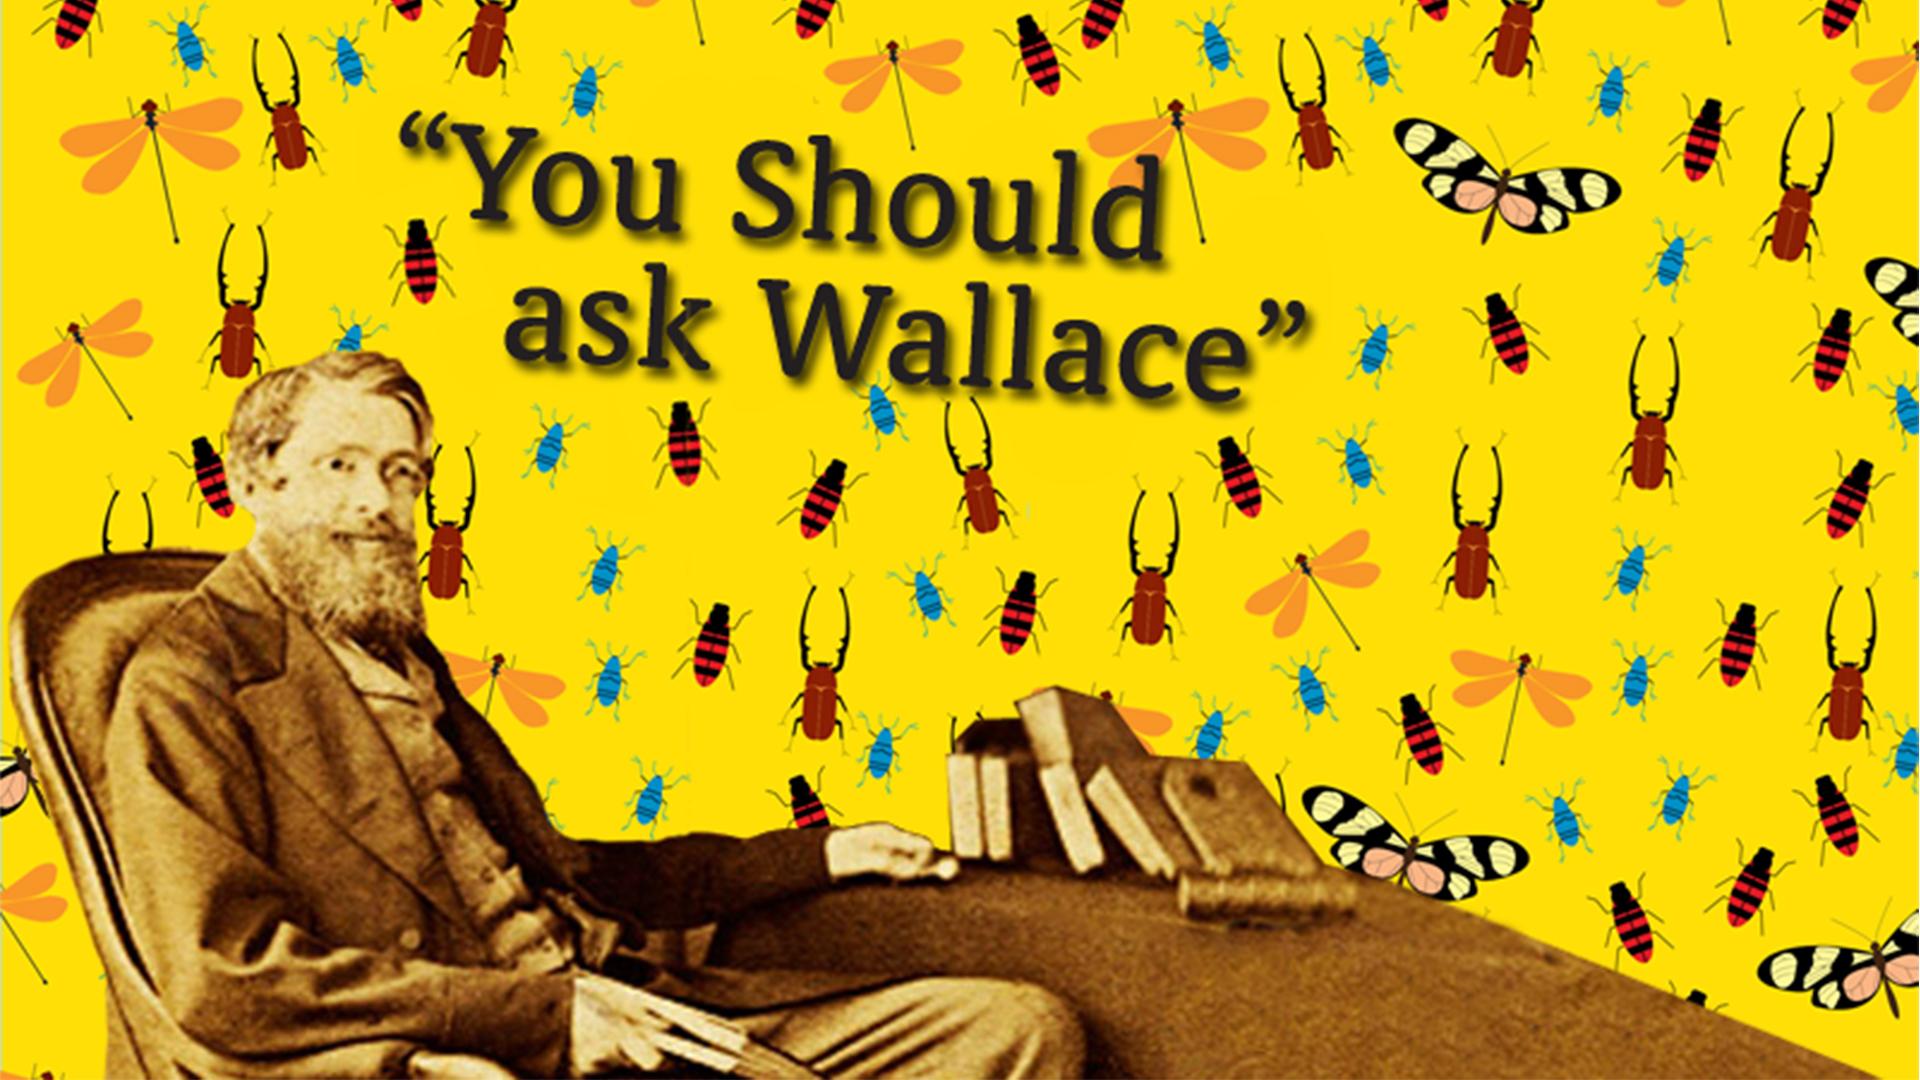 Photograph of Alfred Russel Wallace with illustrations of butterflies and insects in the background